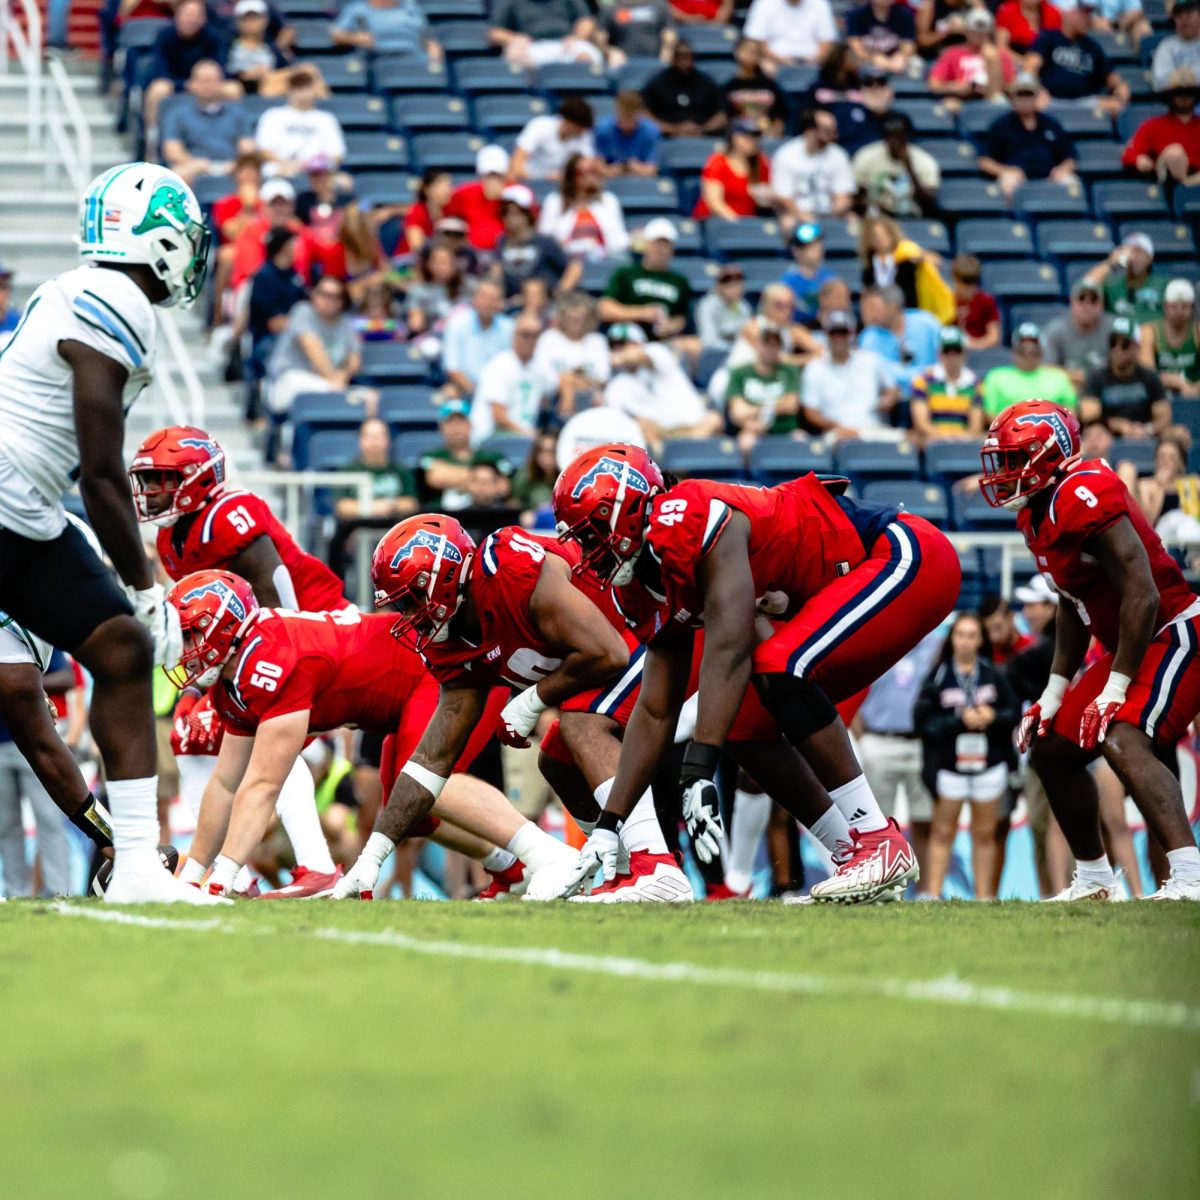 The+FAU+defense+getting+set+for+a+third+down+against+the+Tulane+offense+during+the+Owls+24-8+loss+in+their+home+finale+on+Saturday%2C+Nov.+18%2C+2023.